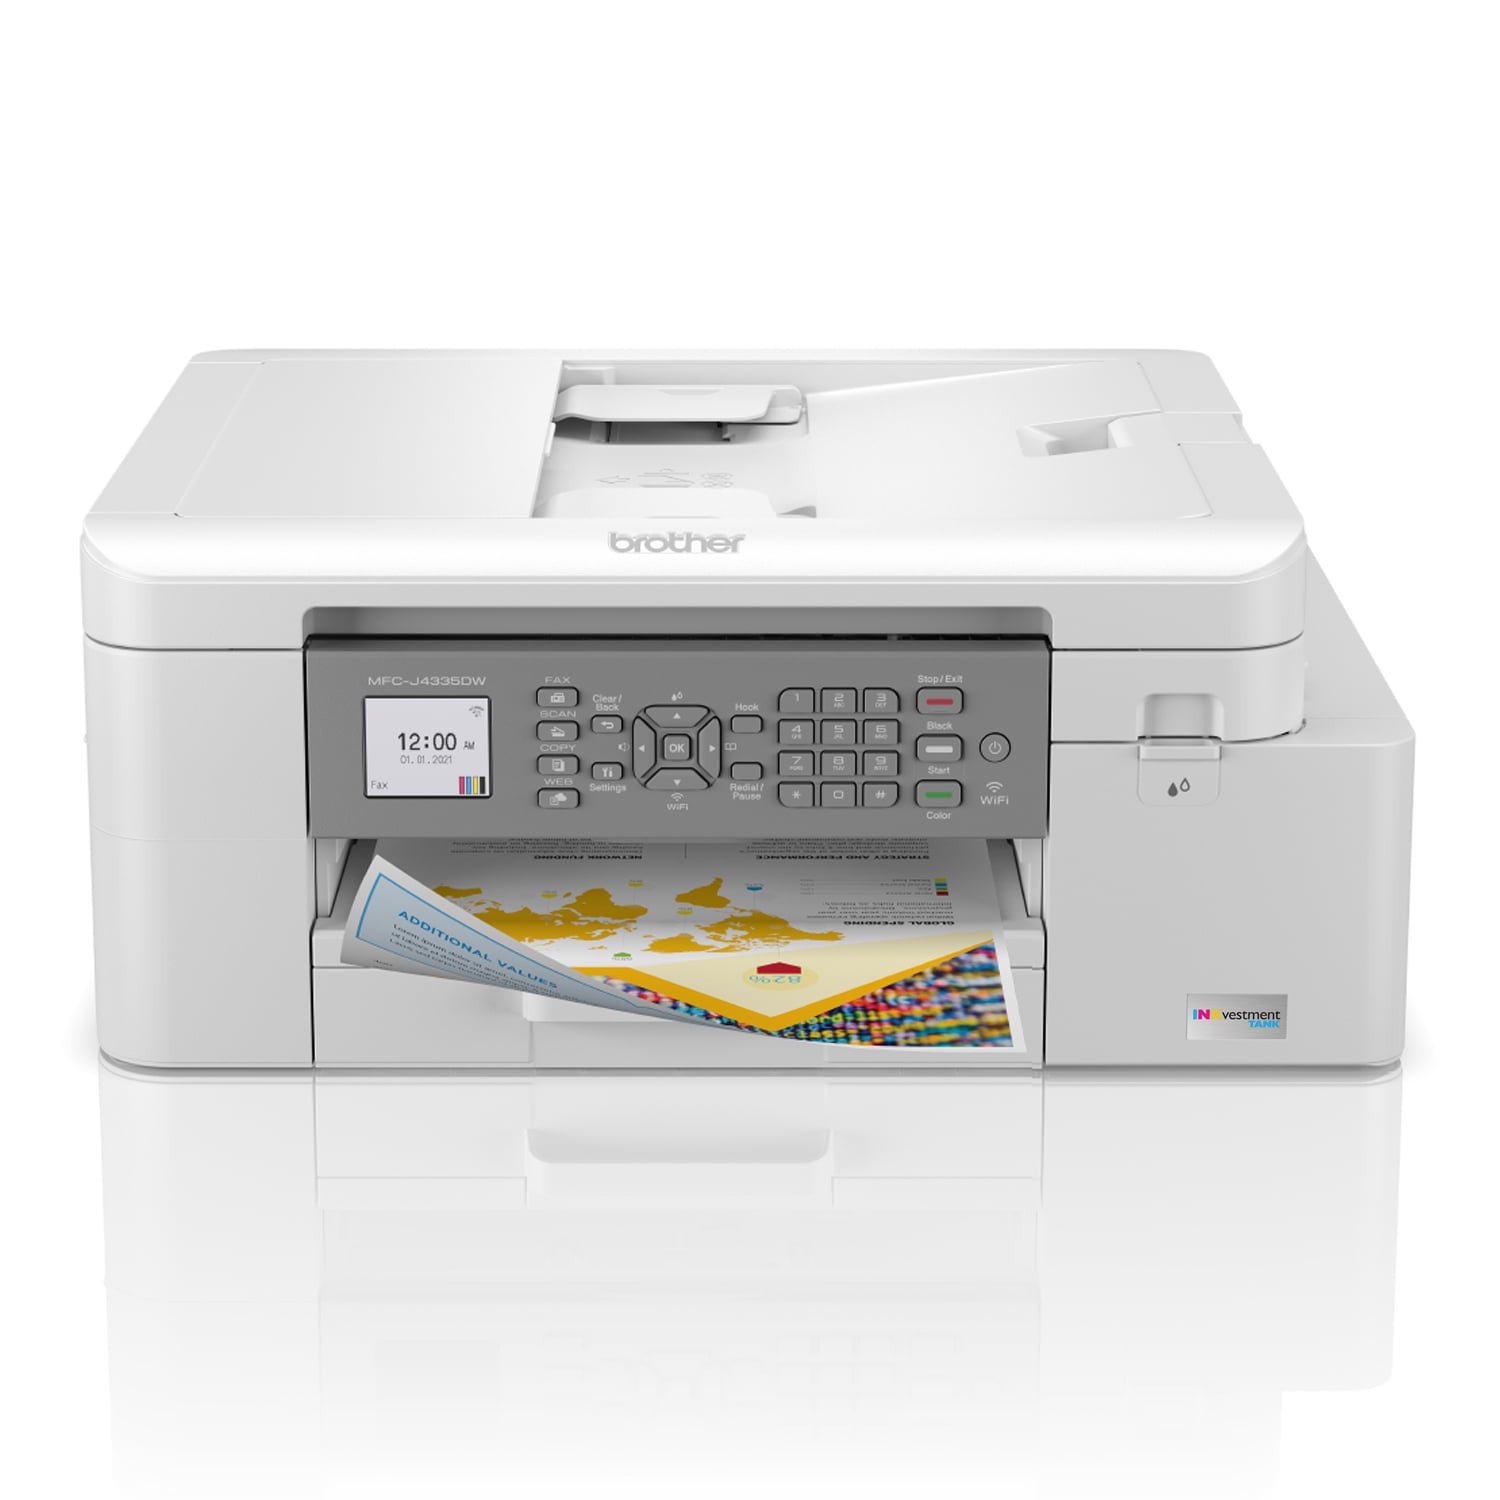 Brother MFC-J4335DW INKvestment Tank All-in-One Color Printer Duplex and Wireless Printing plus Up 1-Year of Ink In-box¹ - Walmart.com